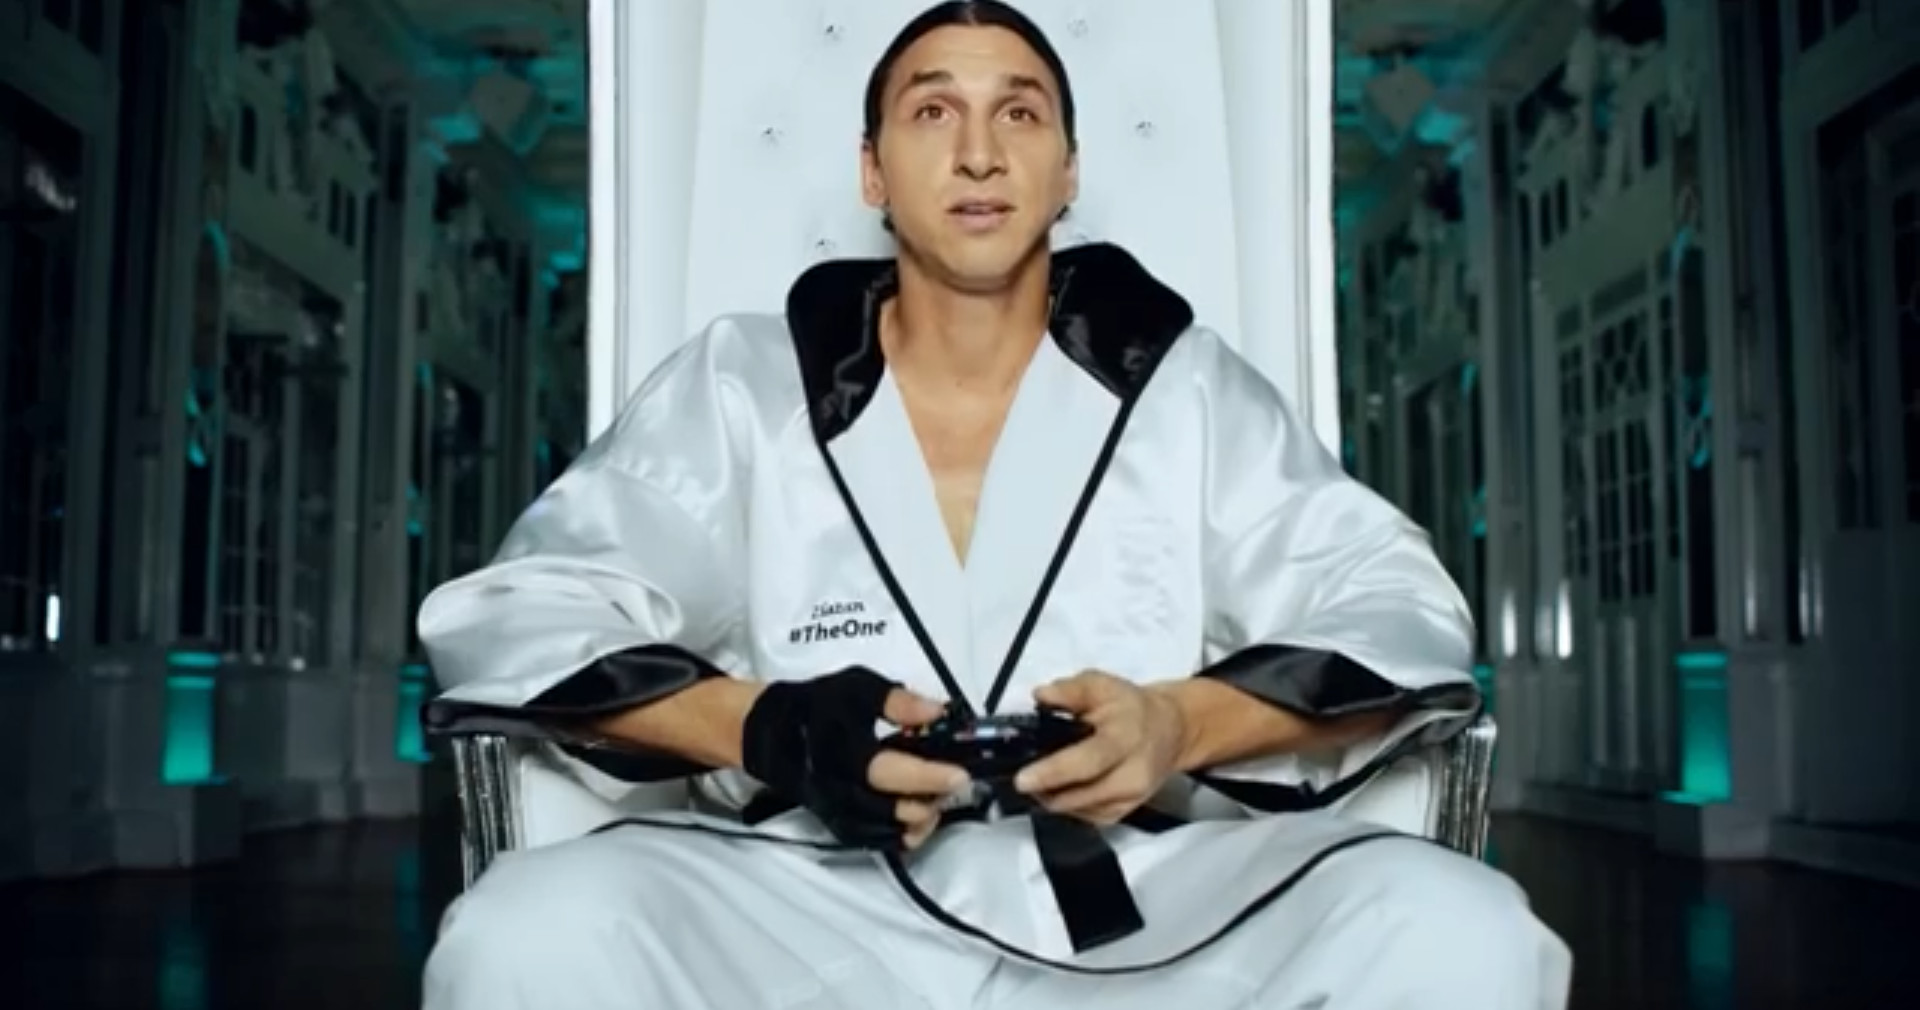 Ibrahimovic-Xbox-One-TV-commercial